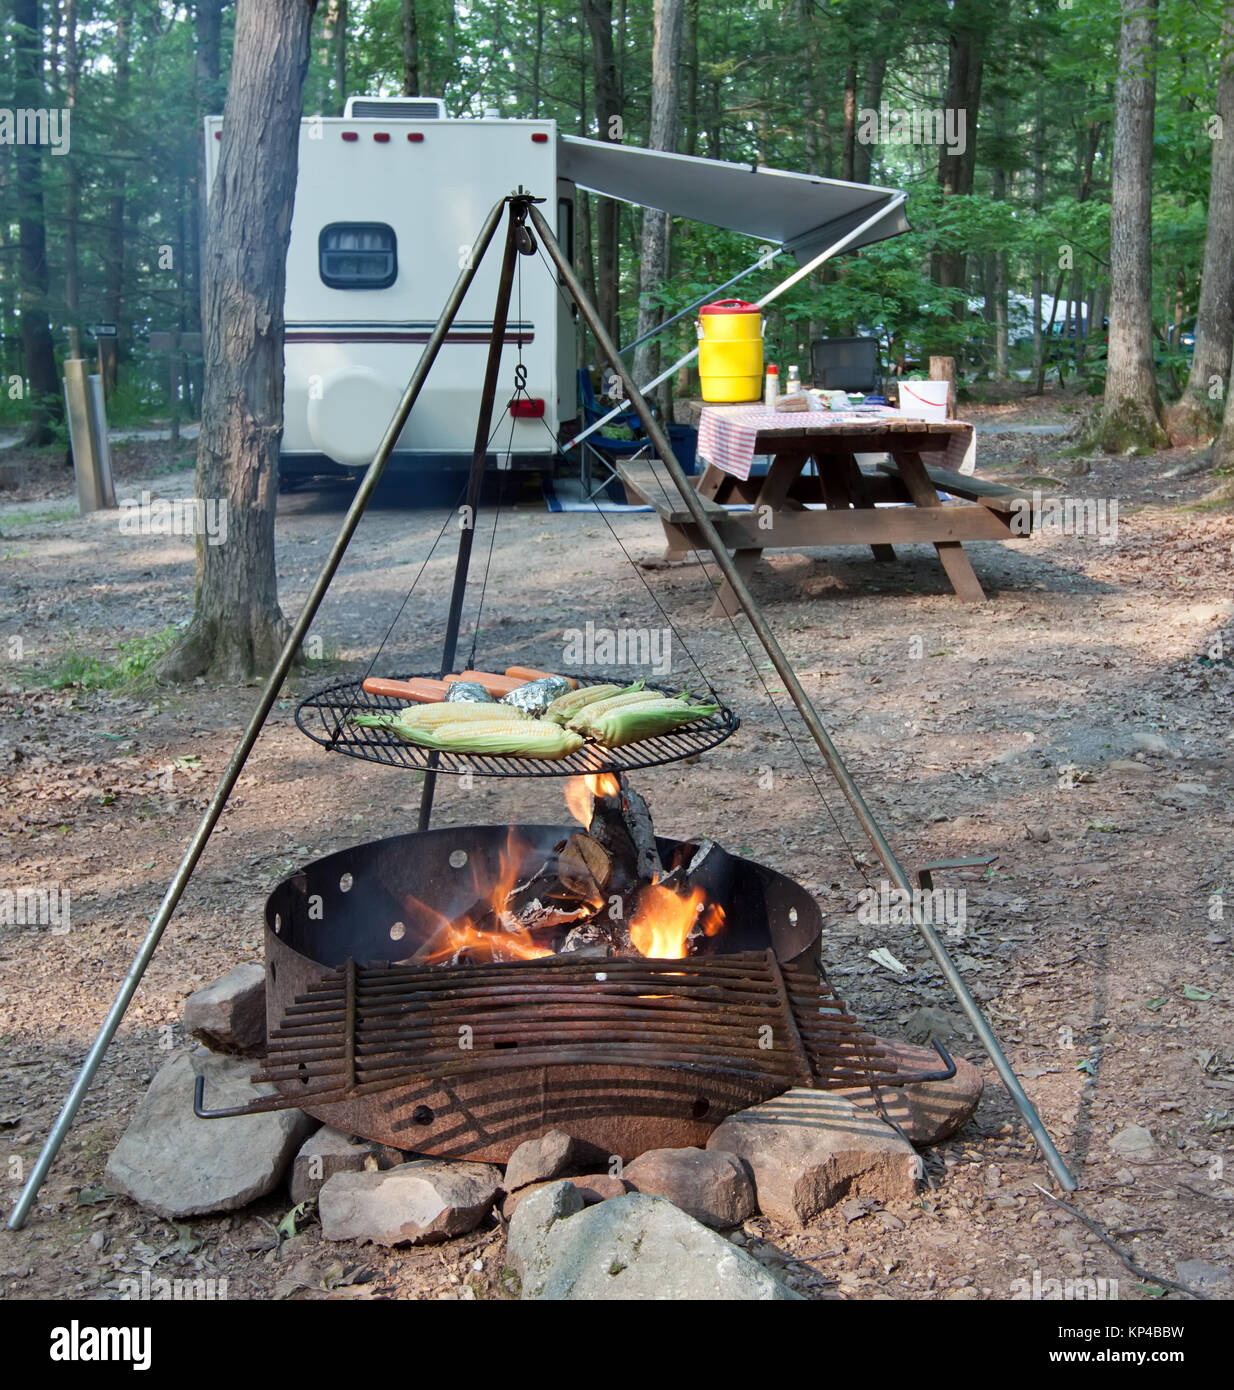 An outdoor grill at a Pennsylvania State Park with a picnic table and camping trailer in the background. Stock Photo